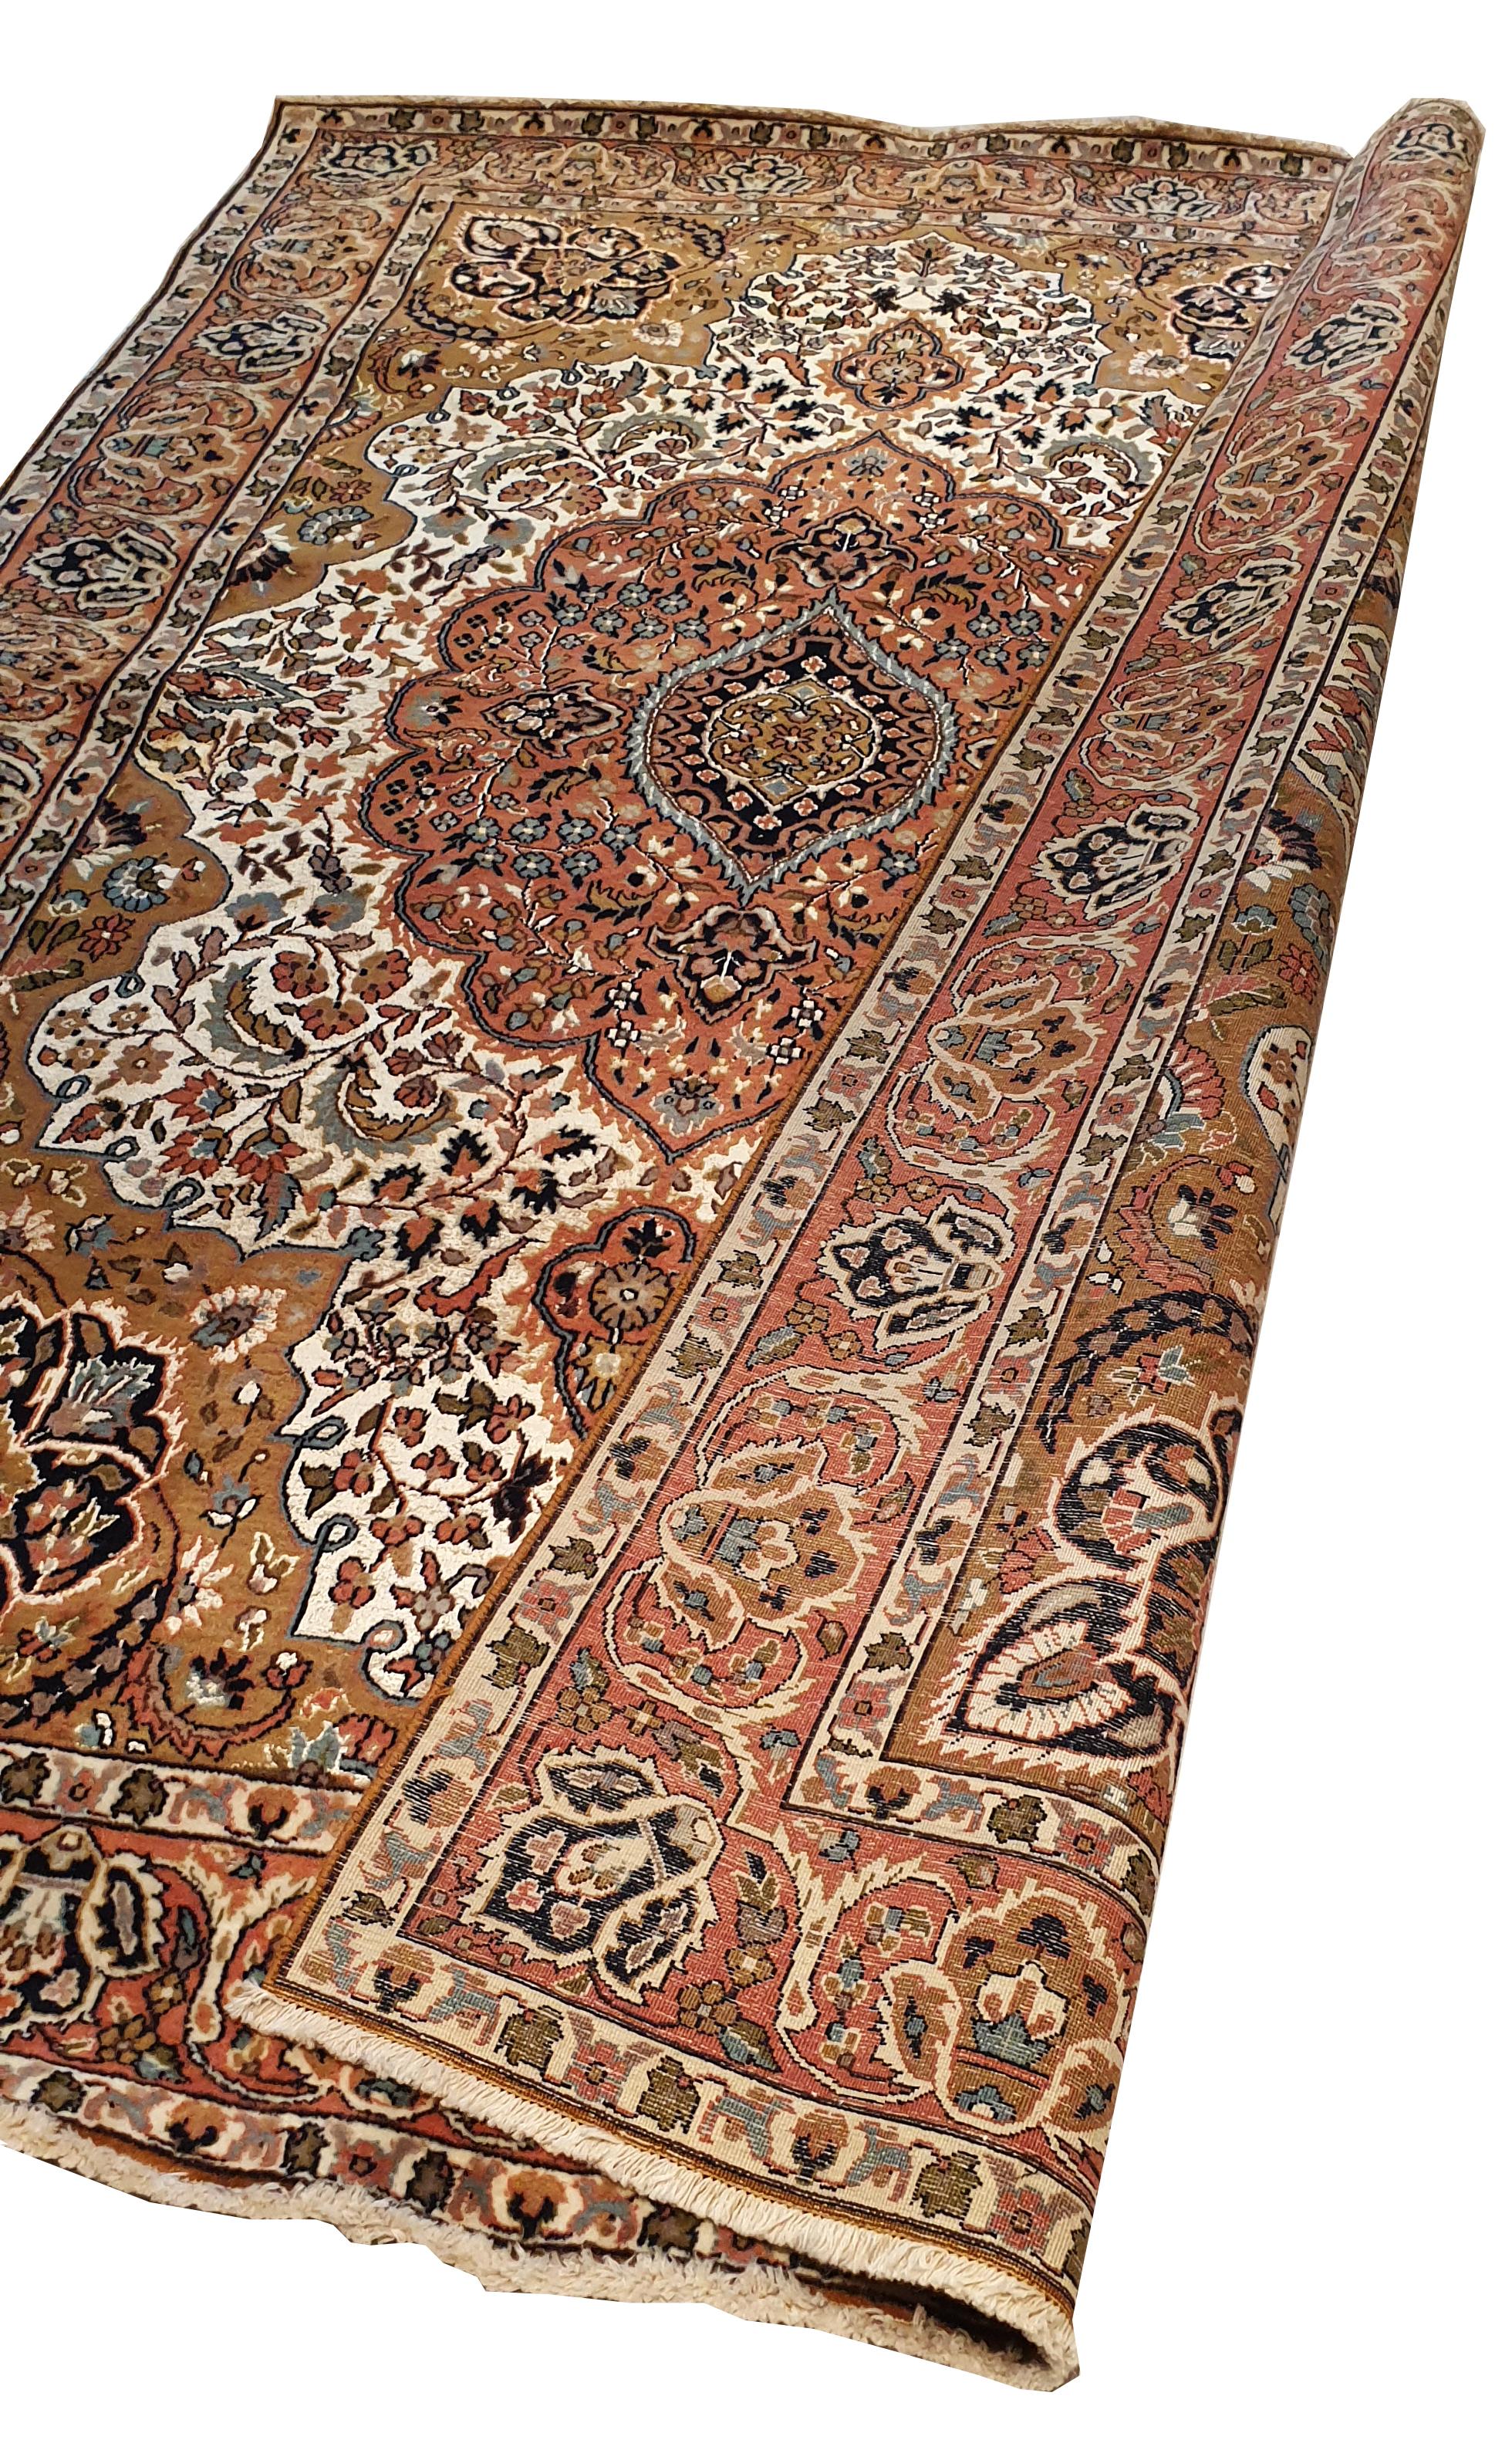  Indian Carpet Wool and Silk, 20th Century - N° 736 In Excellent Condition For Sale In Paris, FR